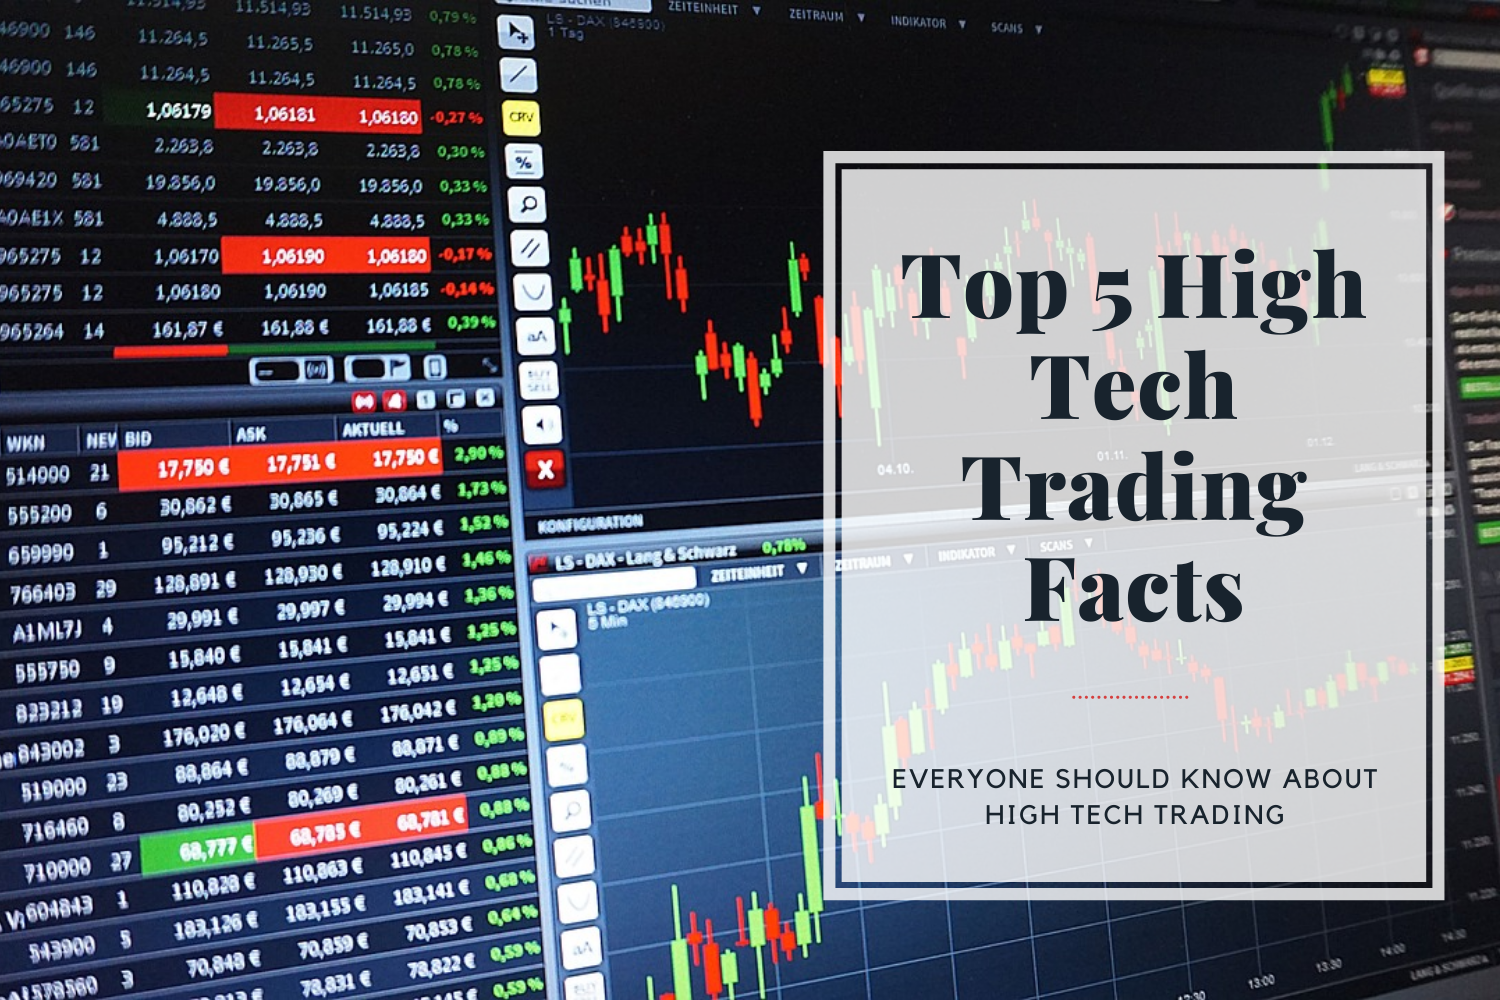 Top 5 High Tech Trading Facts